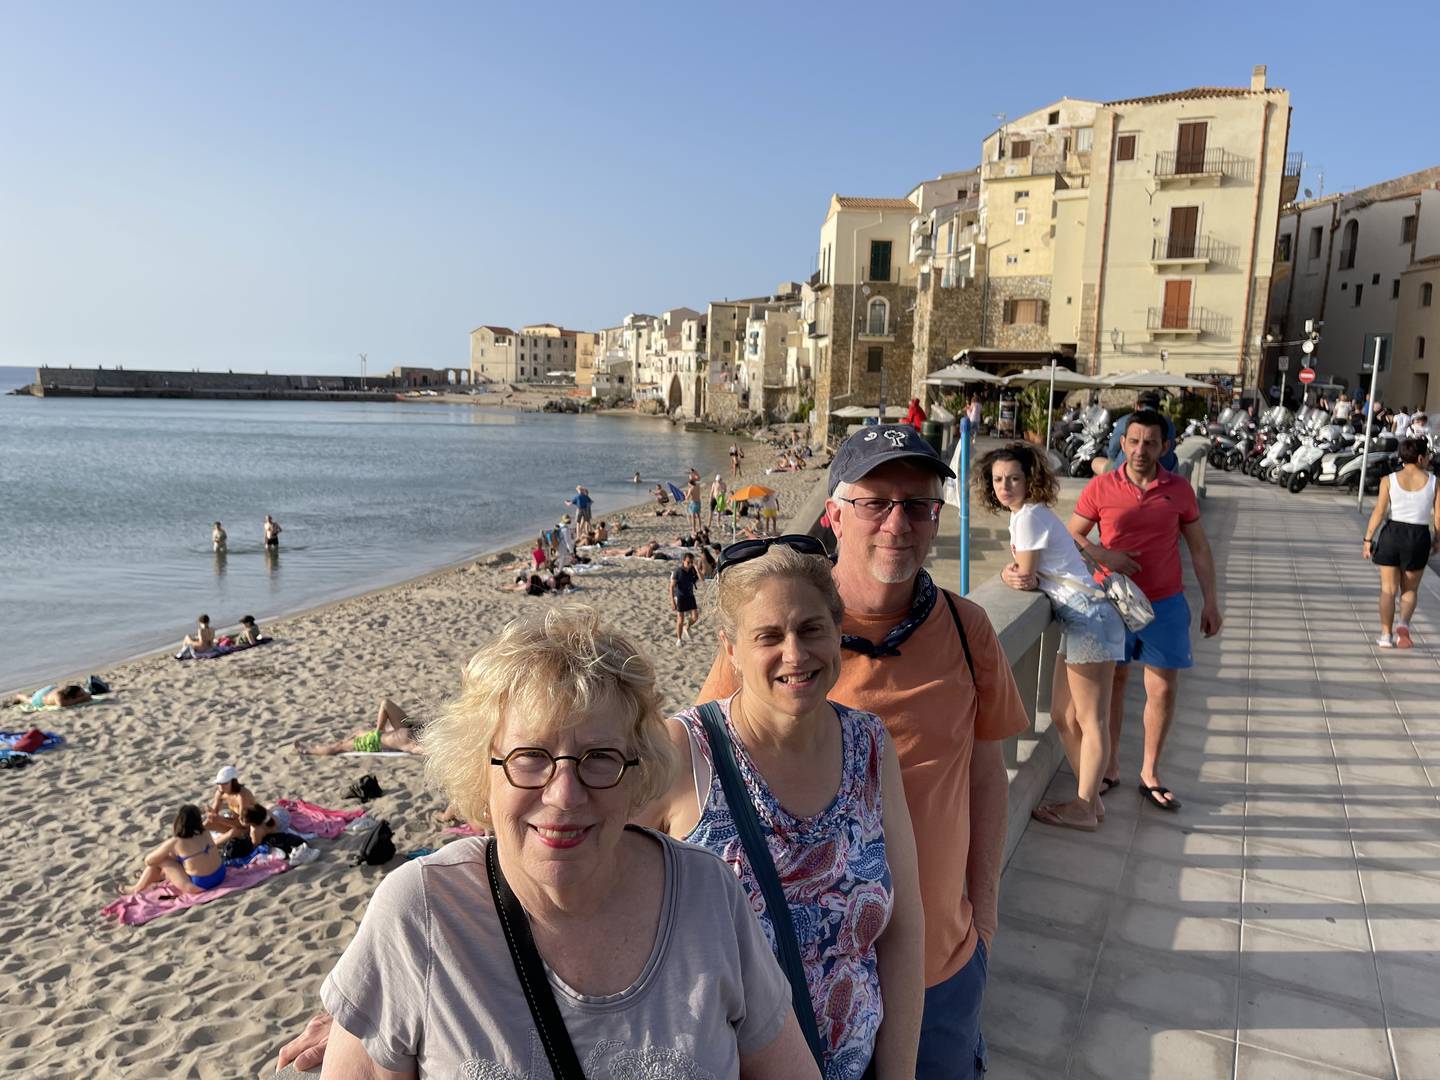 A group of travelers strolling along the beachfront in Cefalu, Sicily